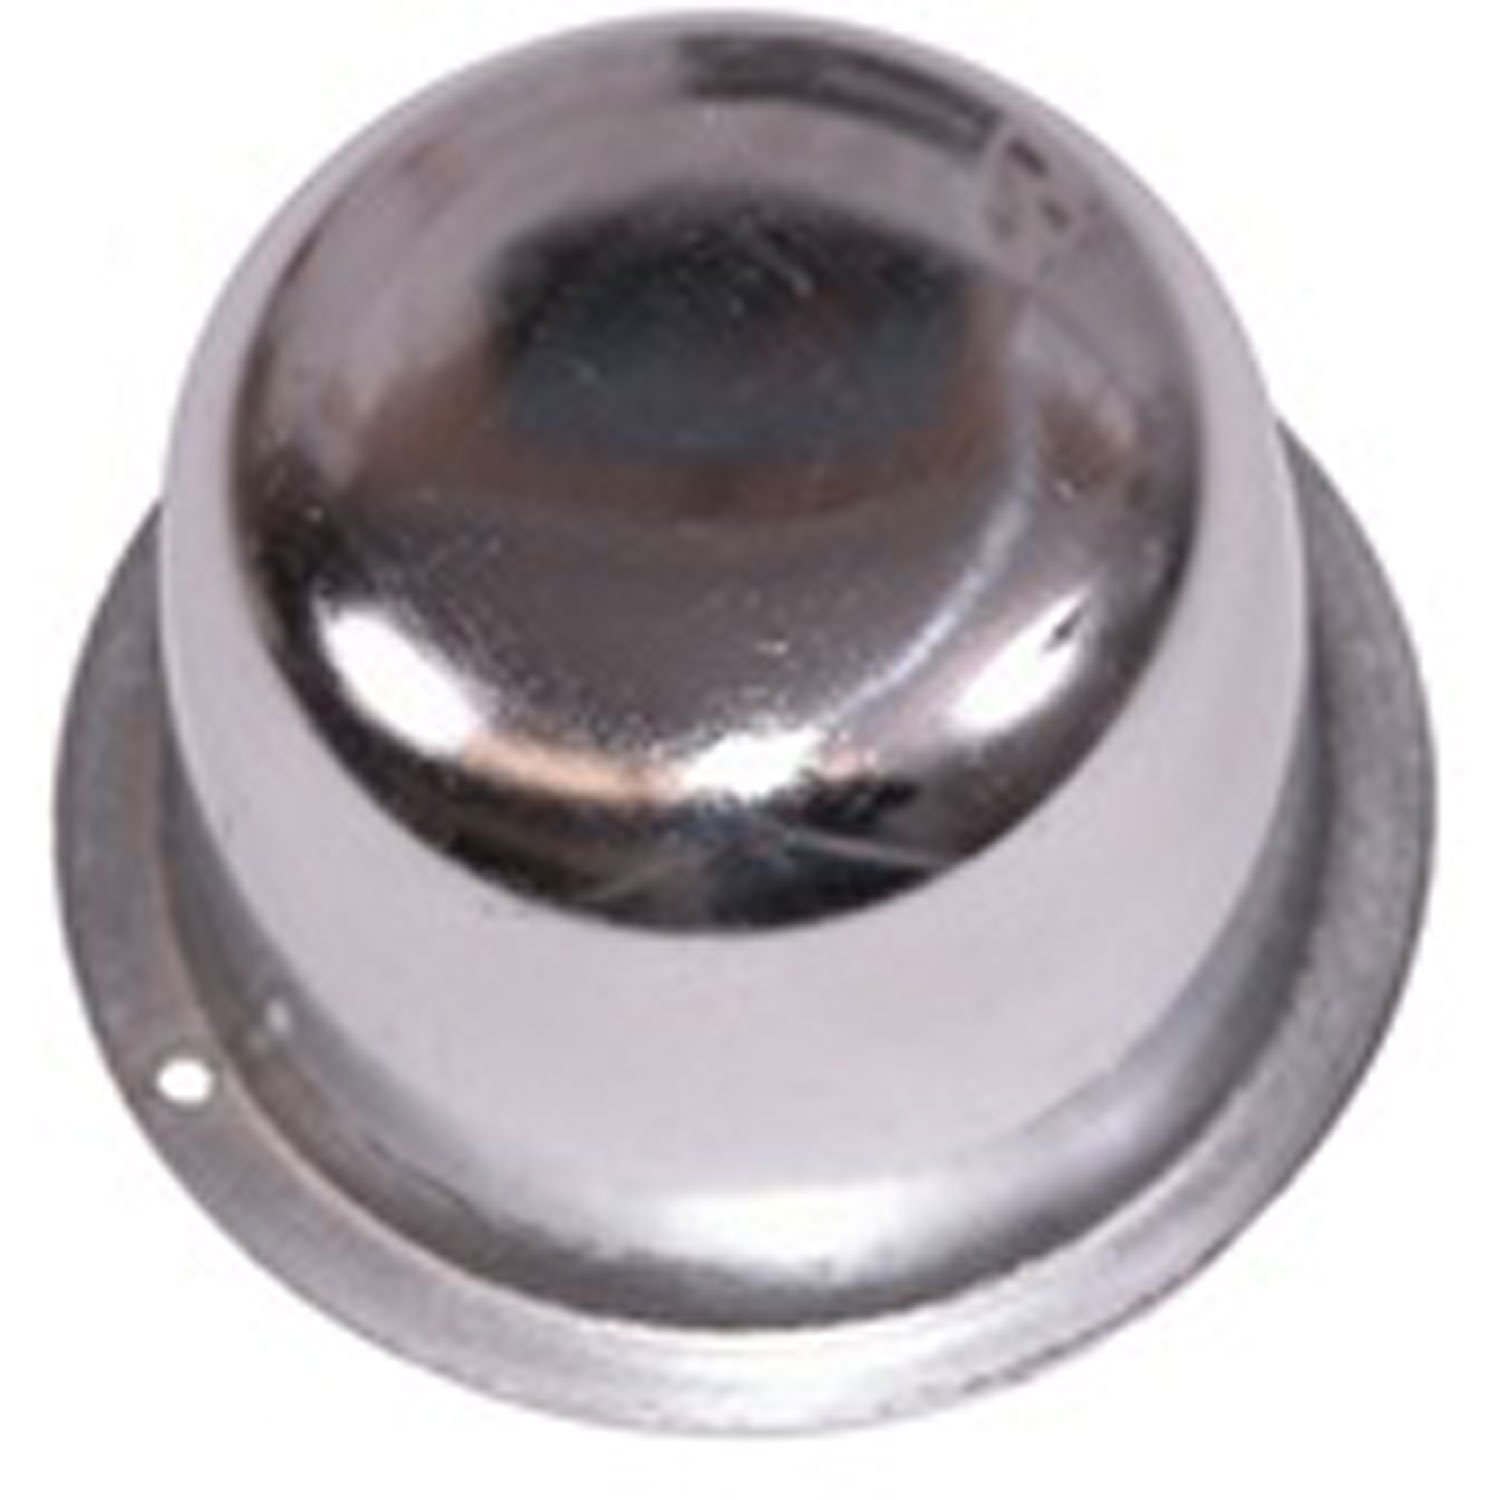 This chrome metal axle hub dust cap from Omix-ADA fits 41-66 Willys models with Dana 25 front axle o